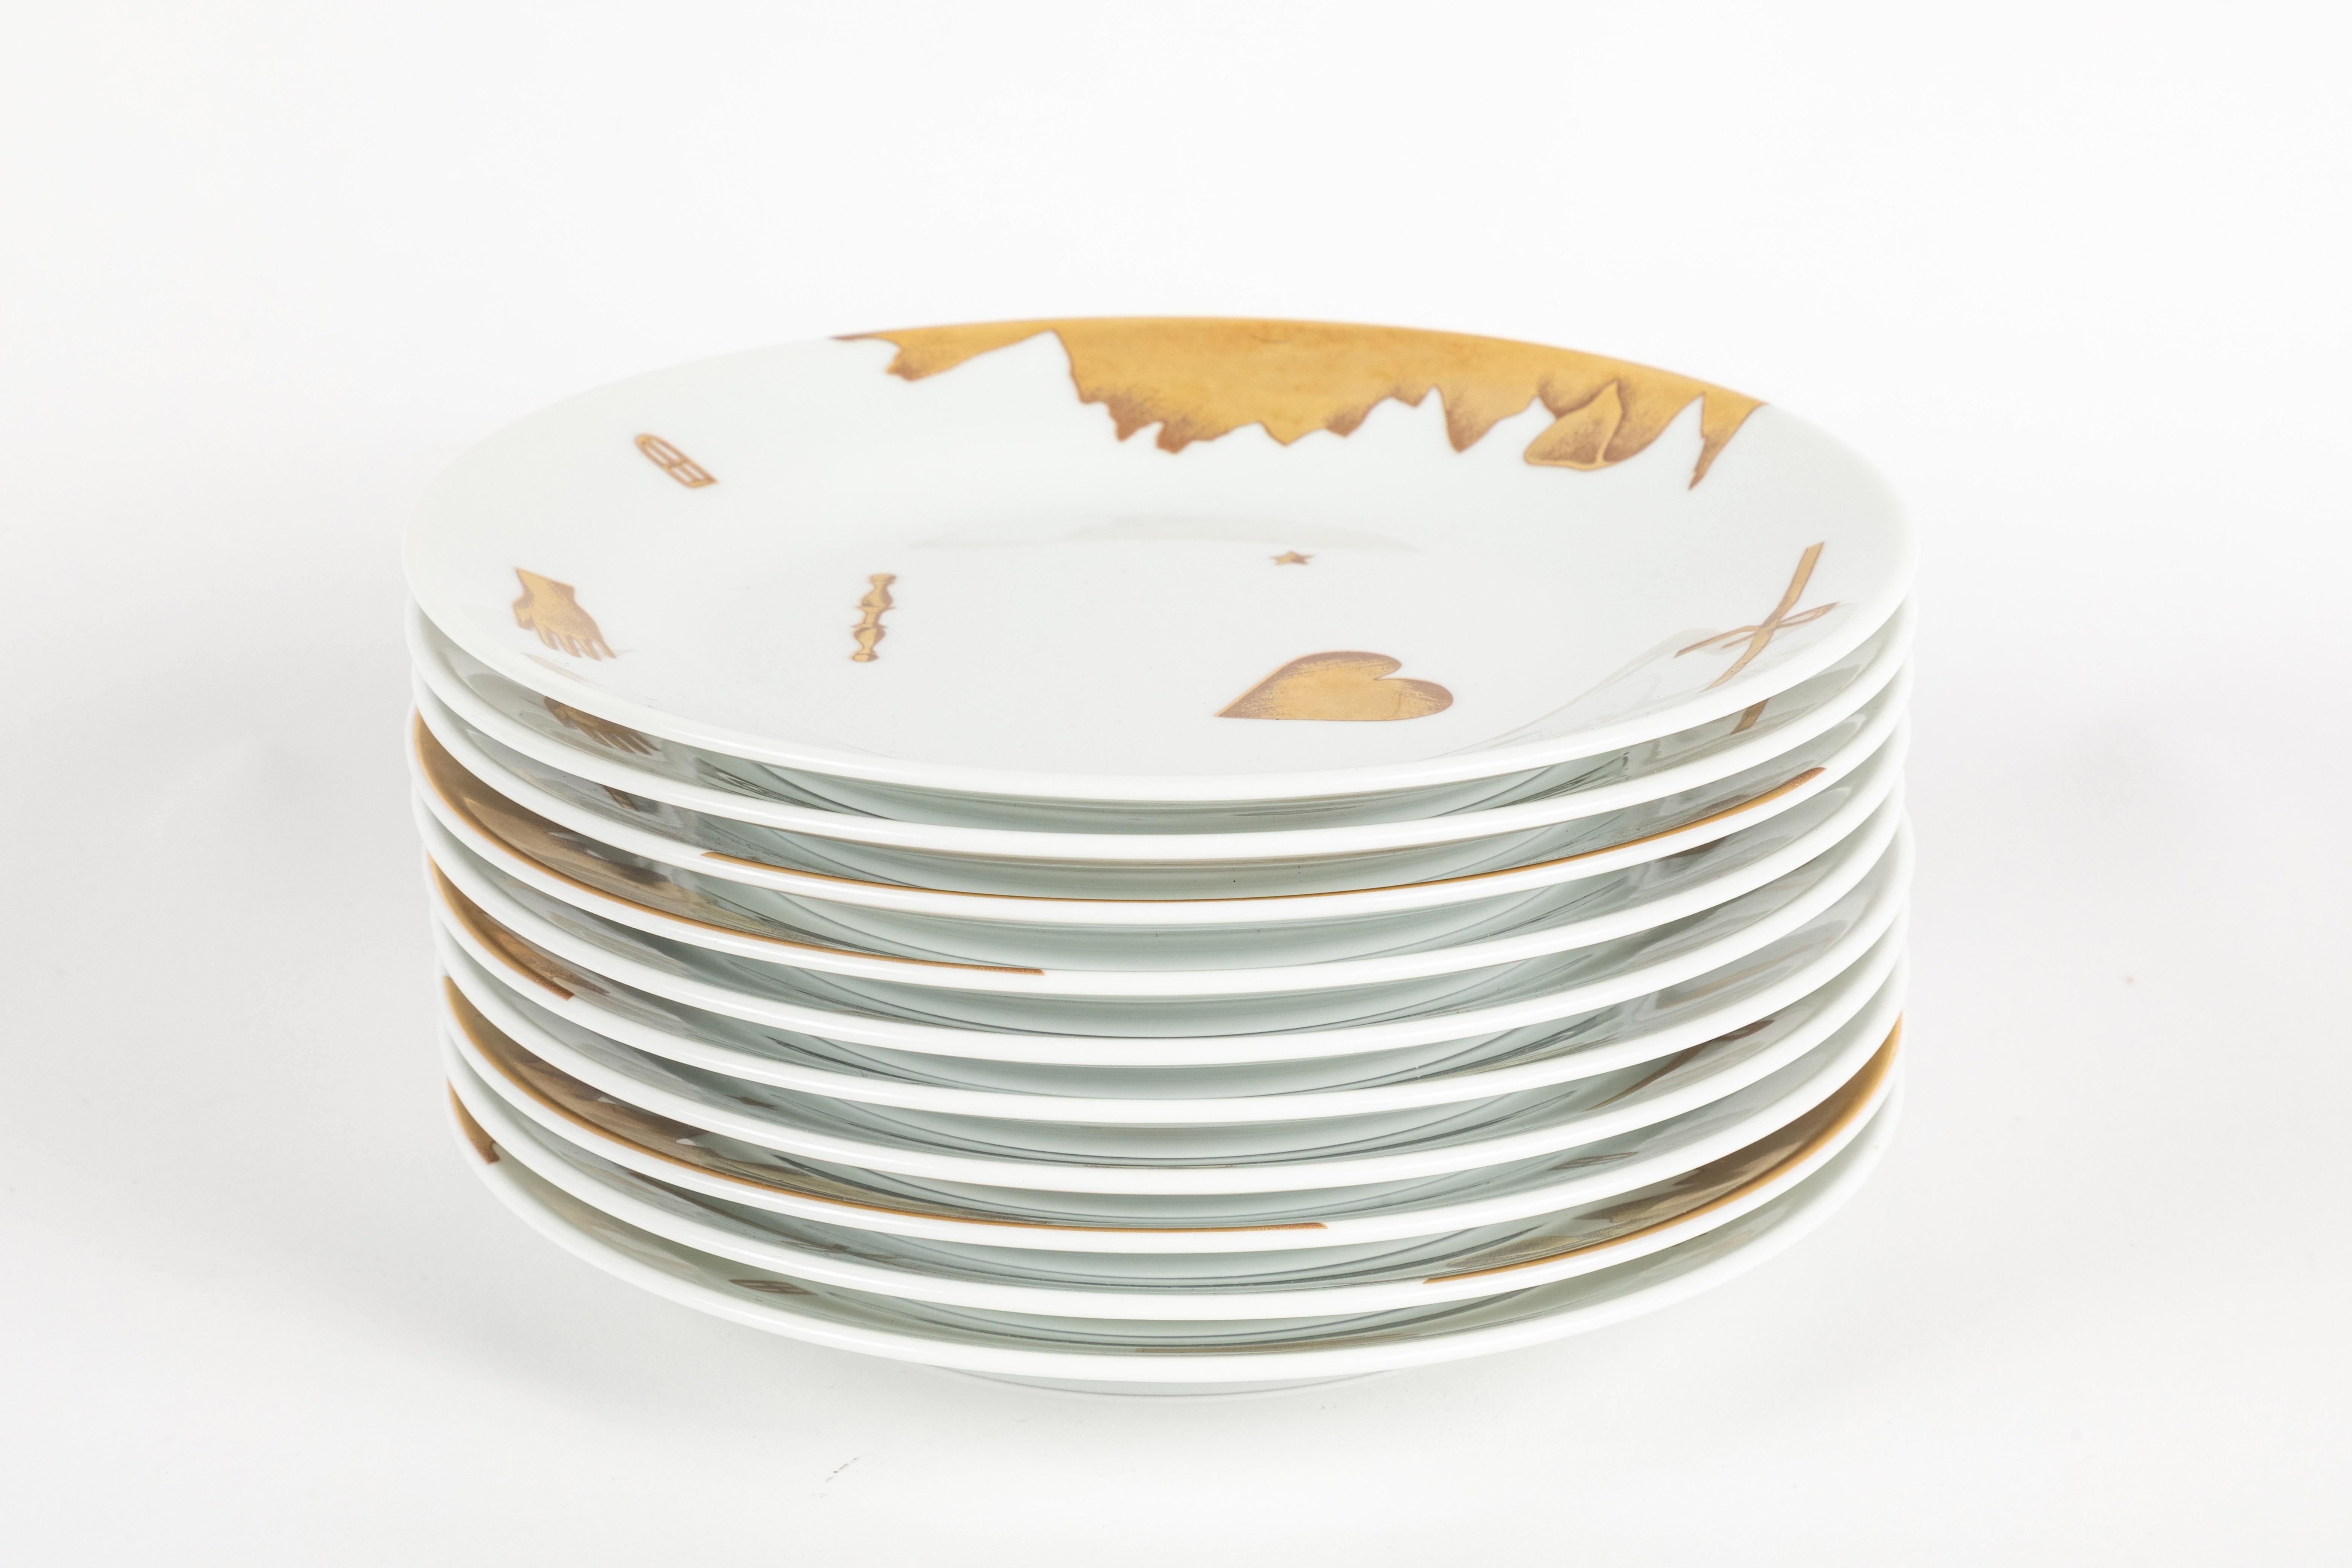 A wonderful set of 10 dessert plates designed by Gio Ponti from the series Trionfo Italiano. Reissued and manufactured by Richard Ginori Manifattura di Doccia Florence, Italy. Beautiful hand painted details executed in an artful design. This pattern